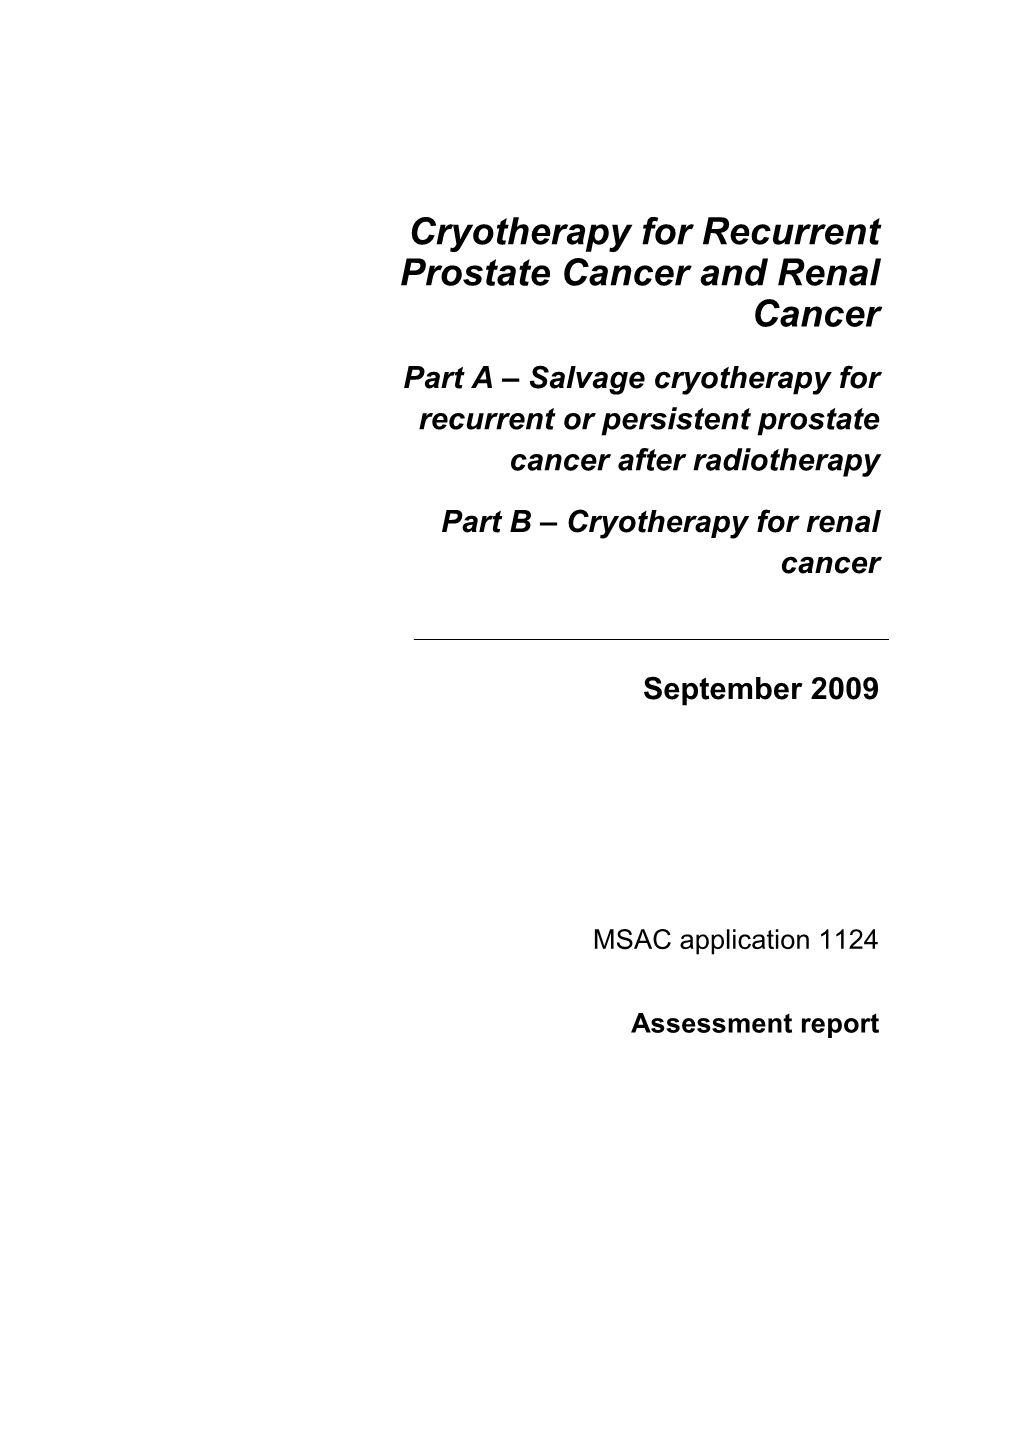 Cryotherapy for Recurrent Prostate Cancer and Renal Cancer